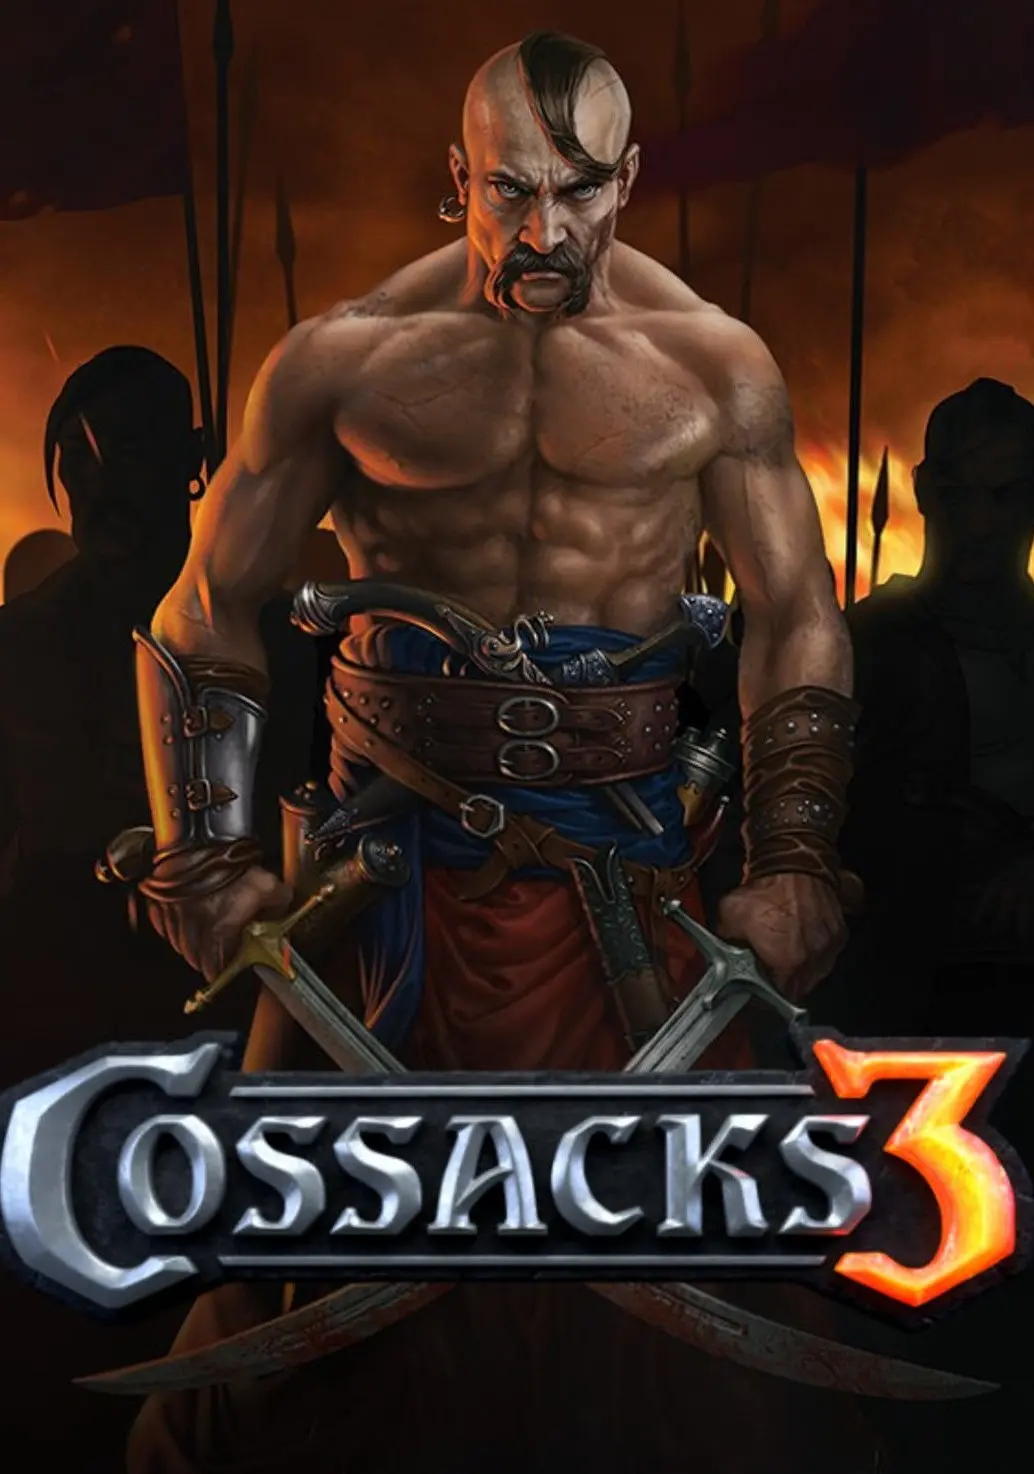 Cossacks 3 Complete Experience (PC / Linux) - Steam - Digital Code